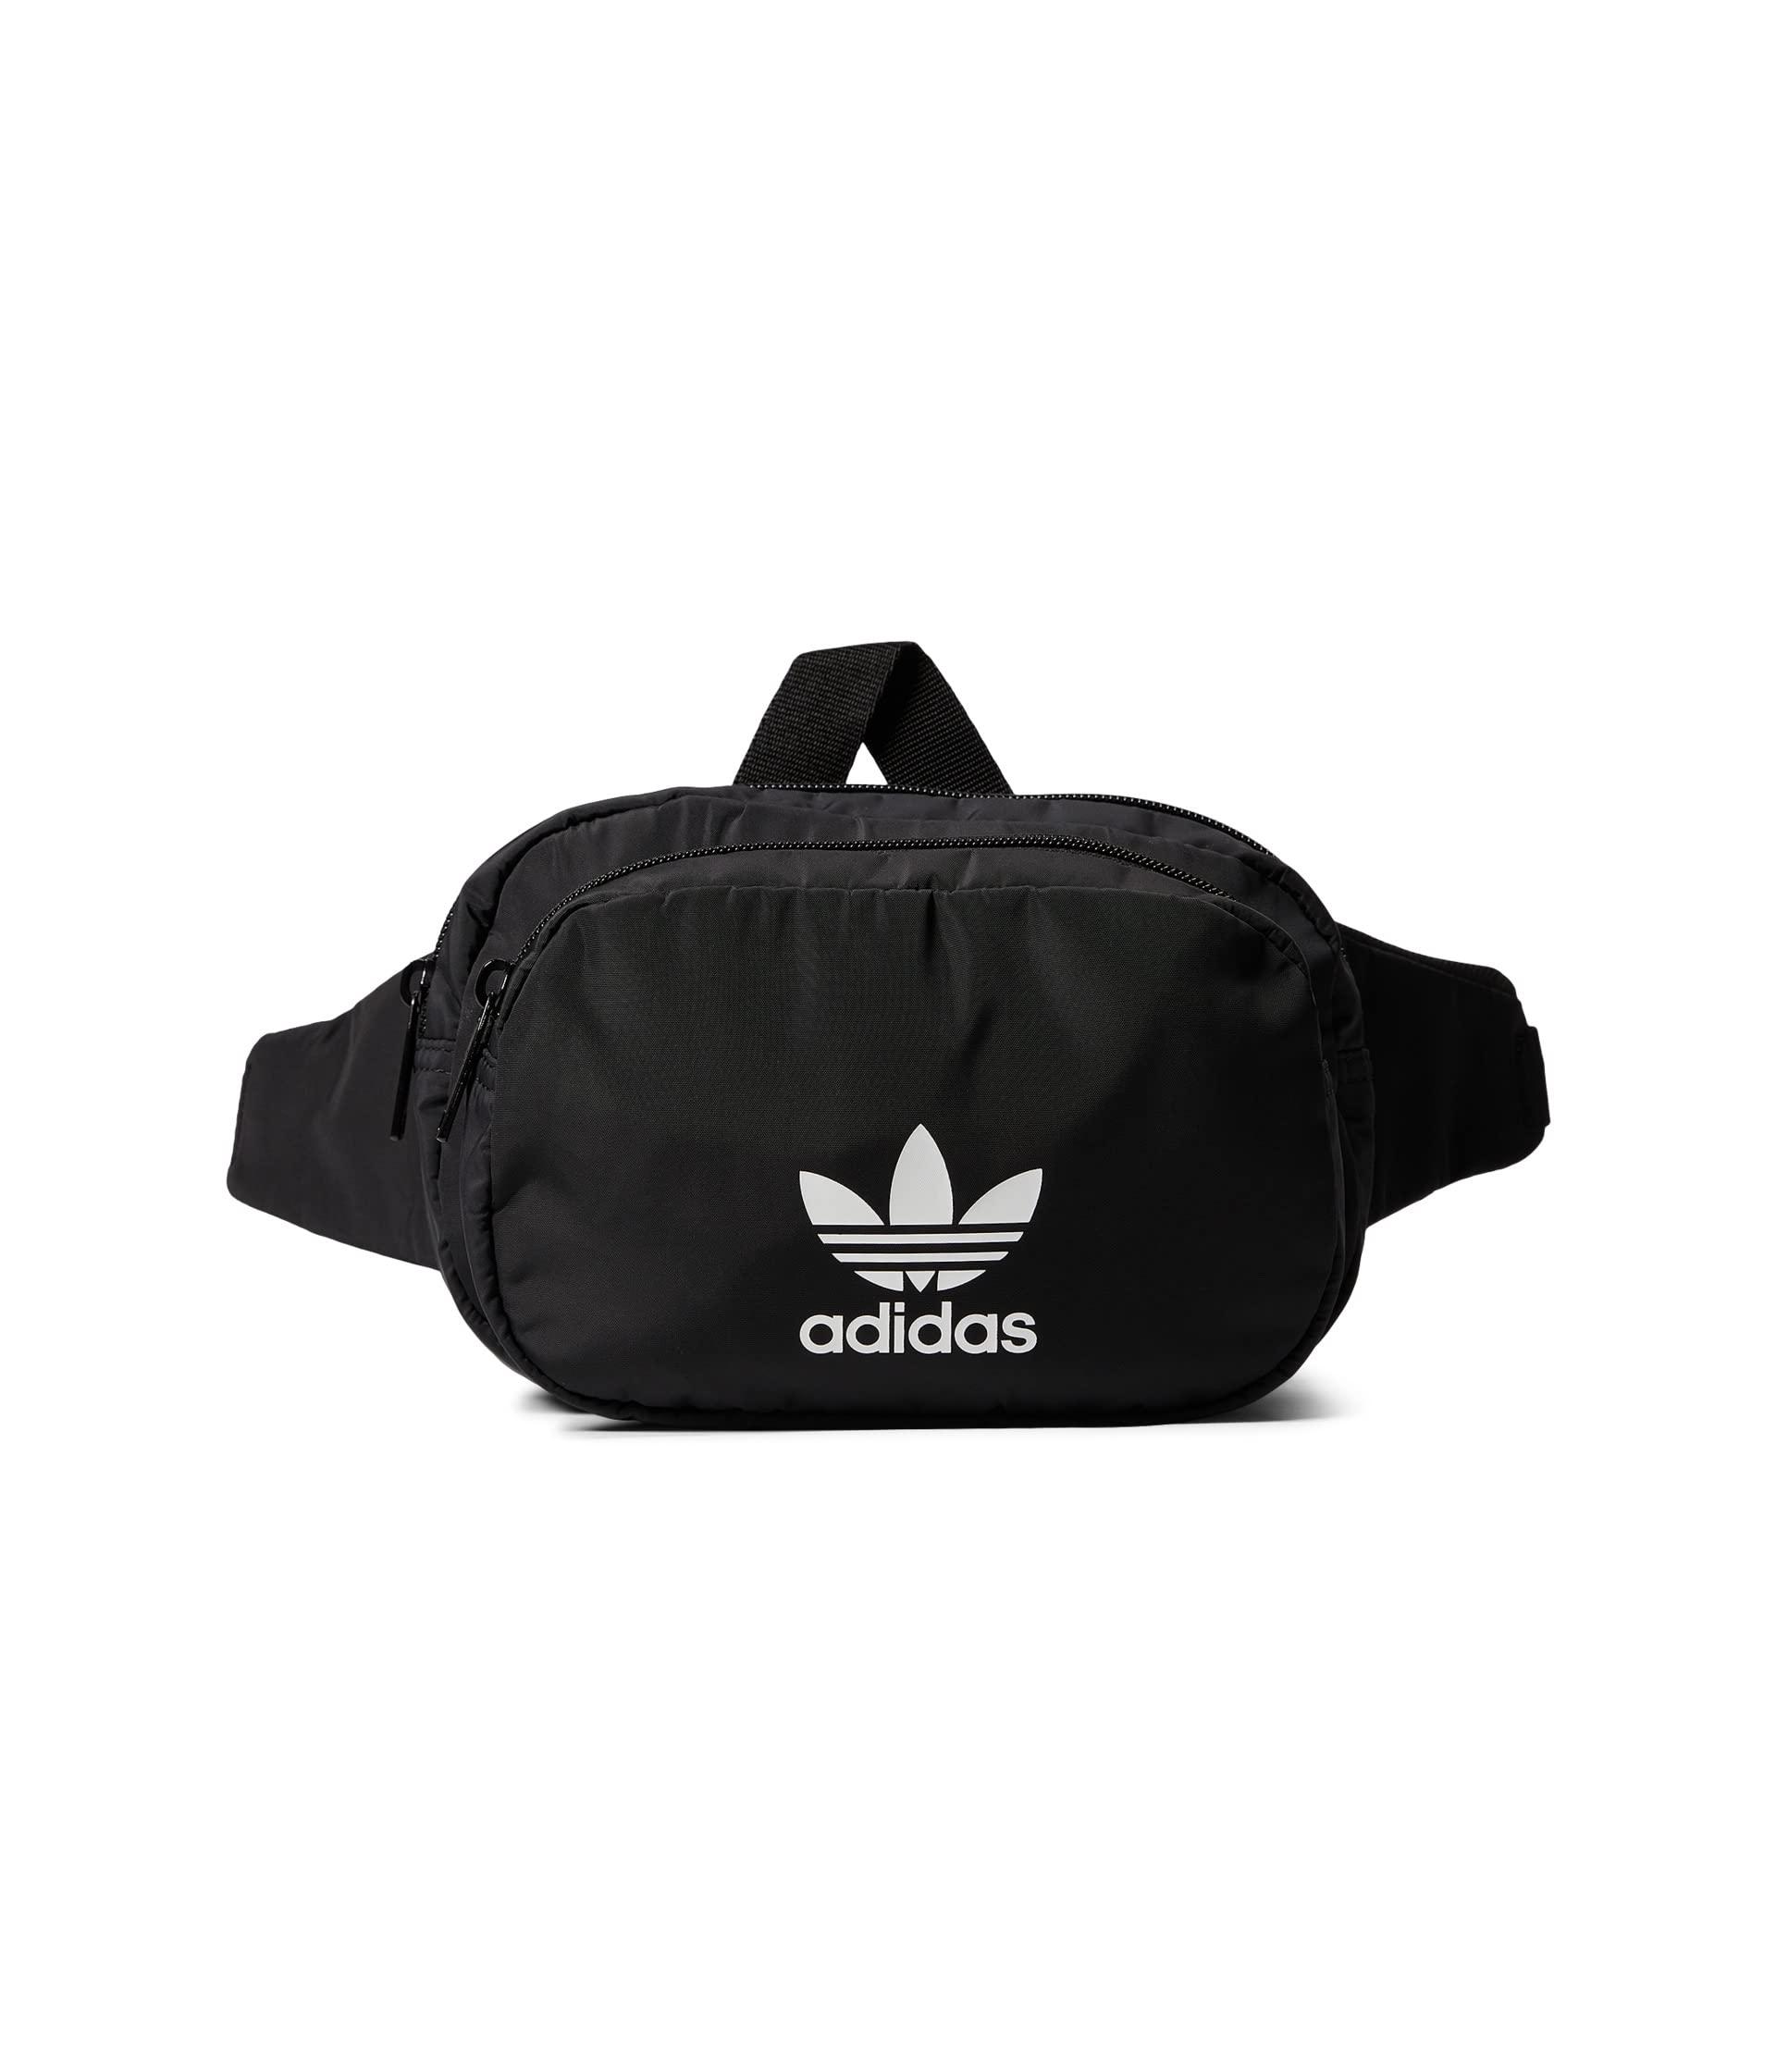 adidas Originals Sport Waist Pack Fanny Pack Travel And Festival Bag in  Black | Lyst